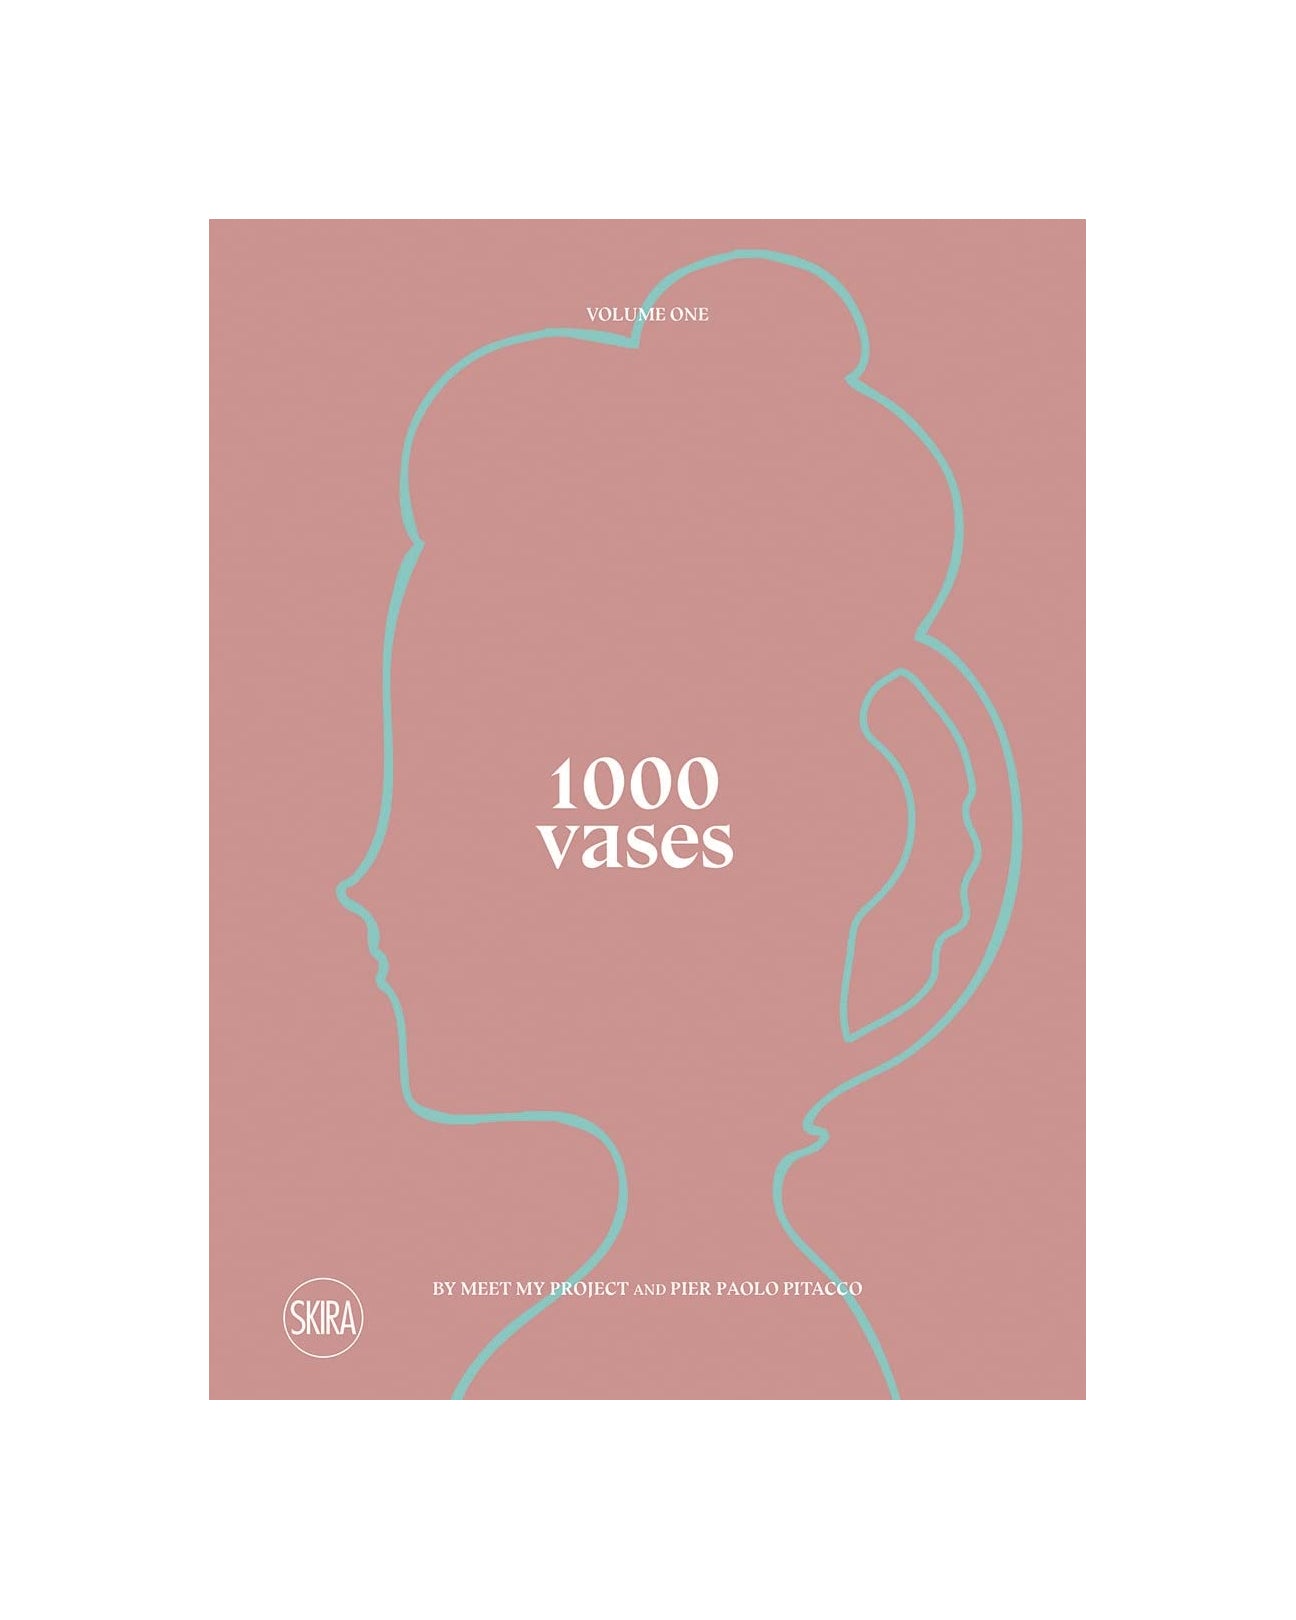 1000 Vases, Volume 1 by Meet My Project and Pier Paolo Pitacco available at Lahn.shop